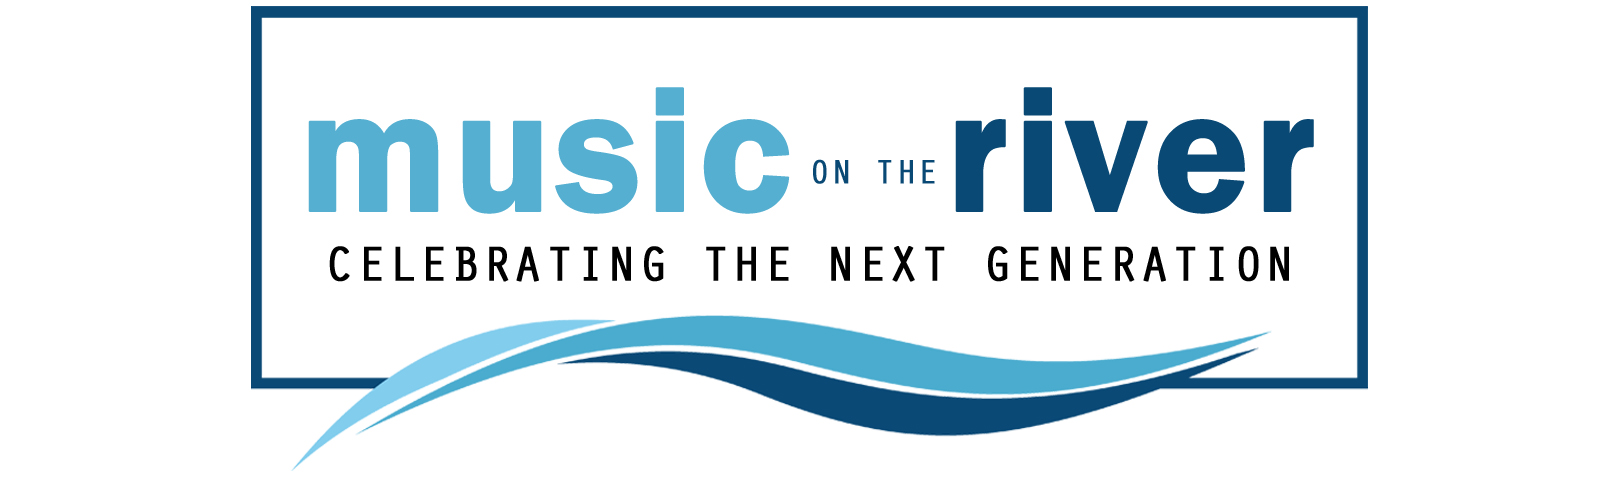 Music on the River - Celebrating the Next Generation